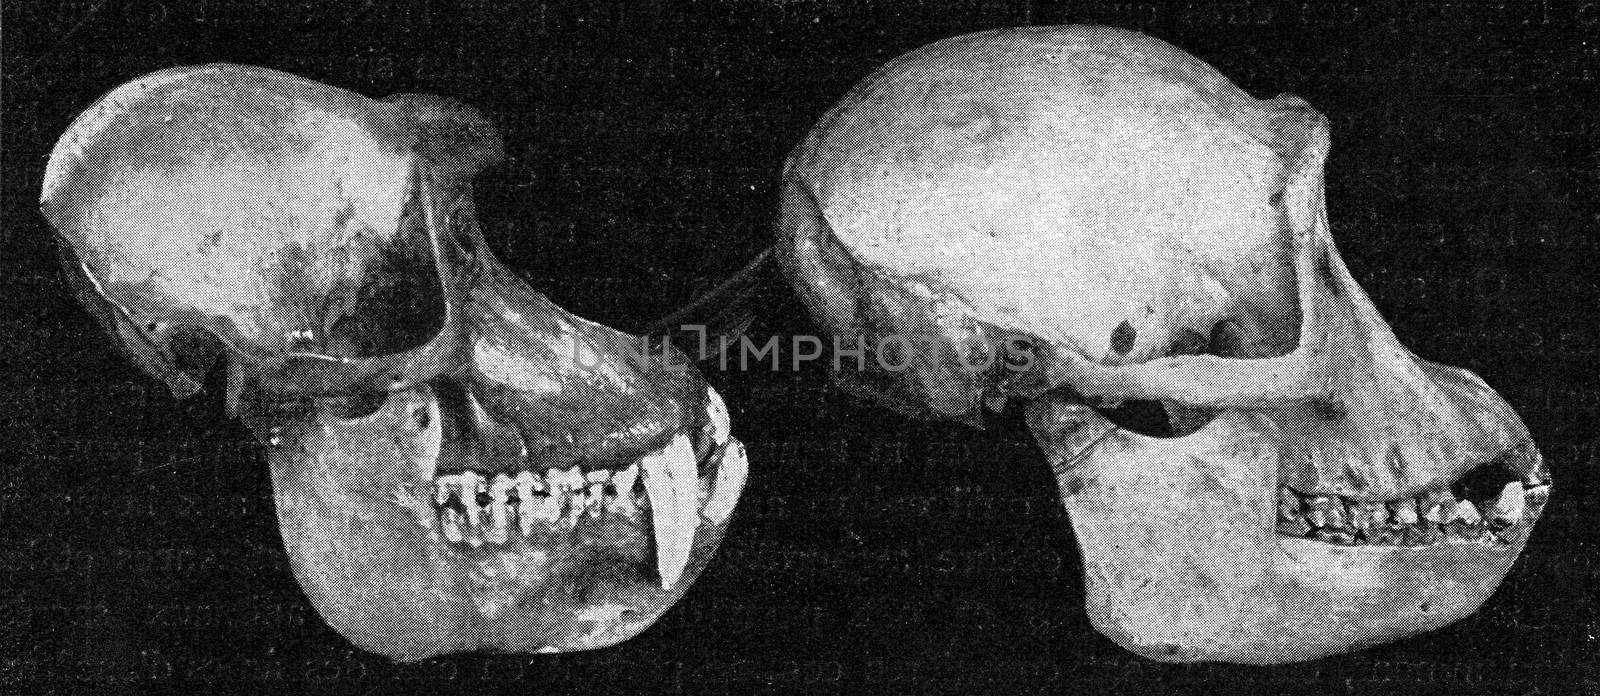 Skulls of papion and a chimpanzee, vintage engraving. by Morphart